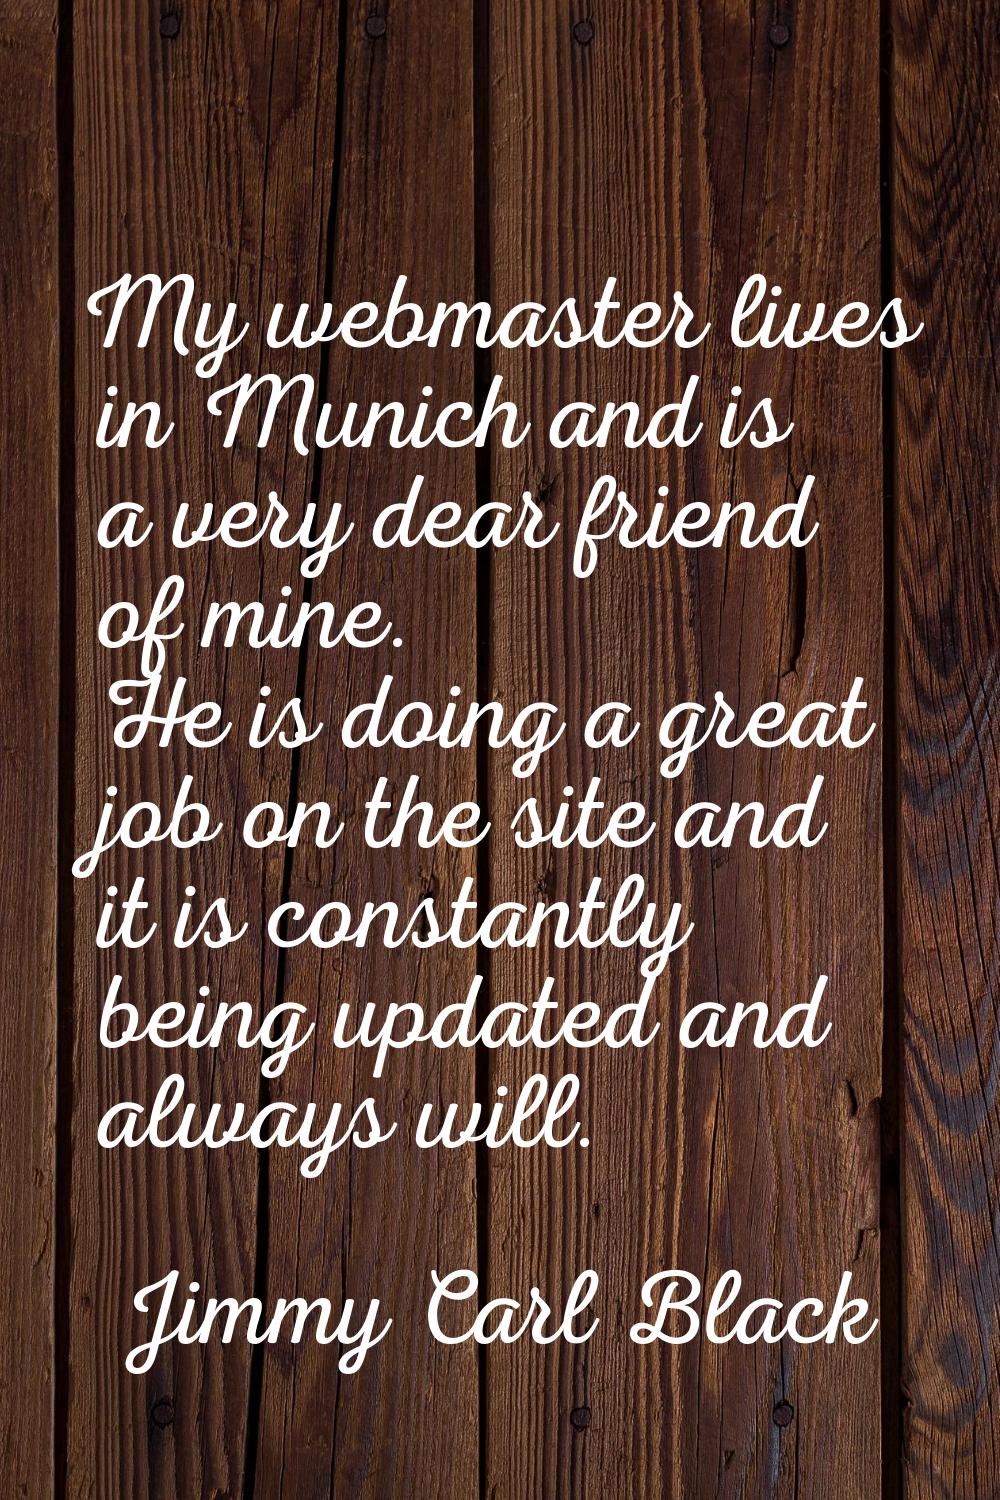 My webmaster lives in Munich and is a very dear friend of mine. He is doing a great job on the site